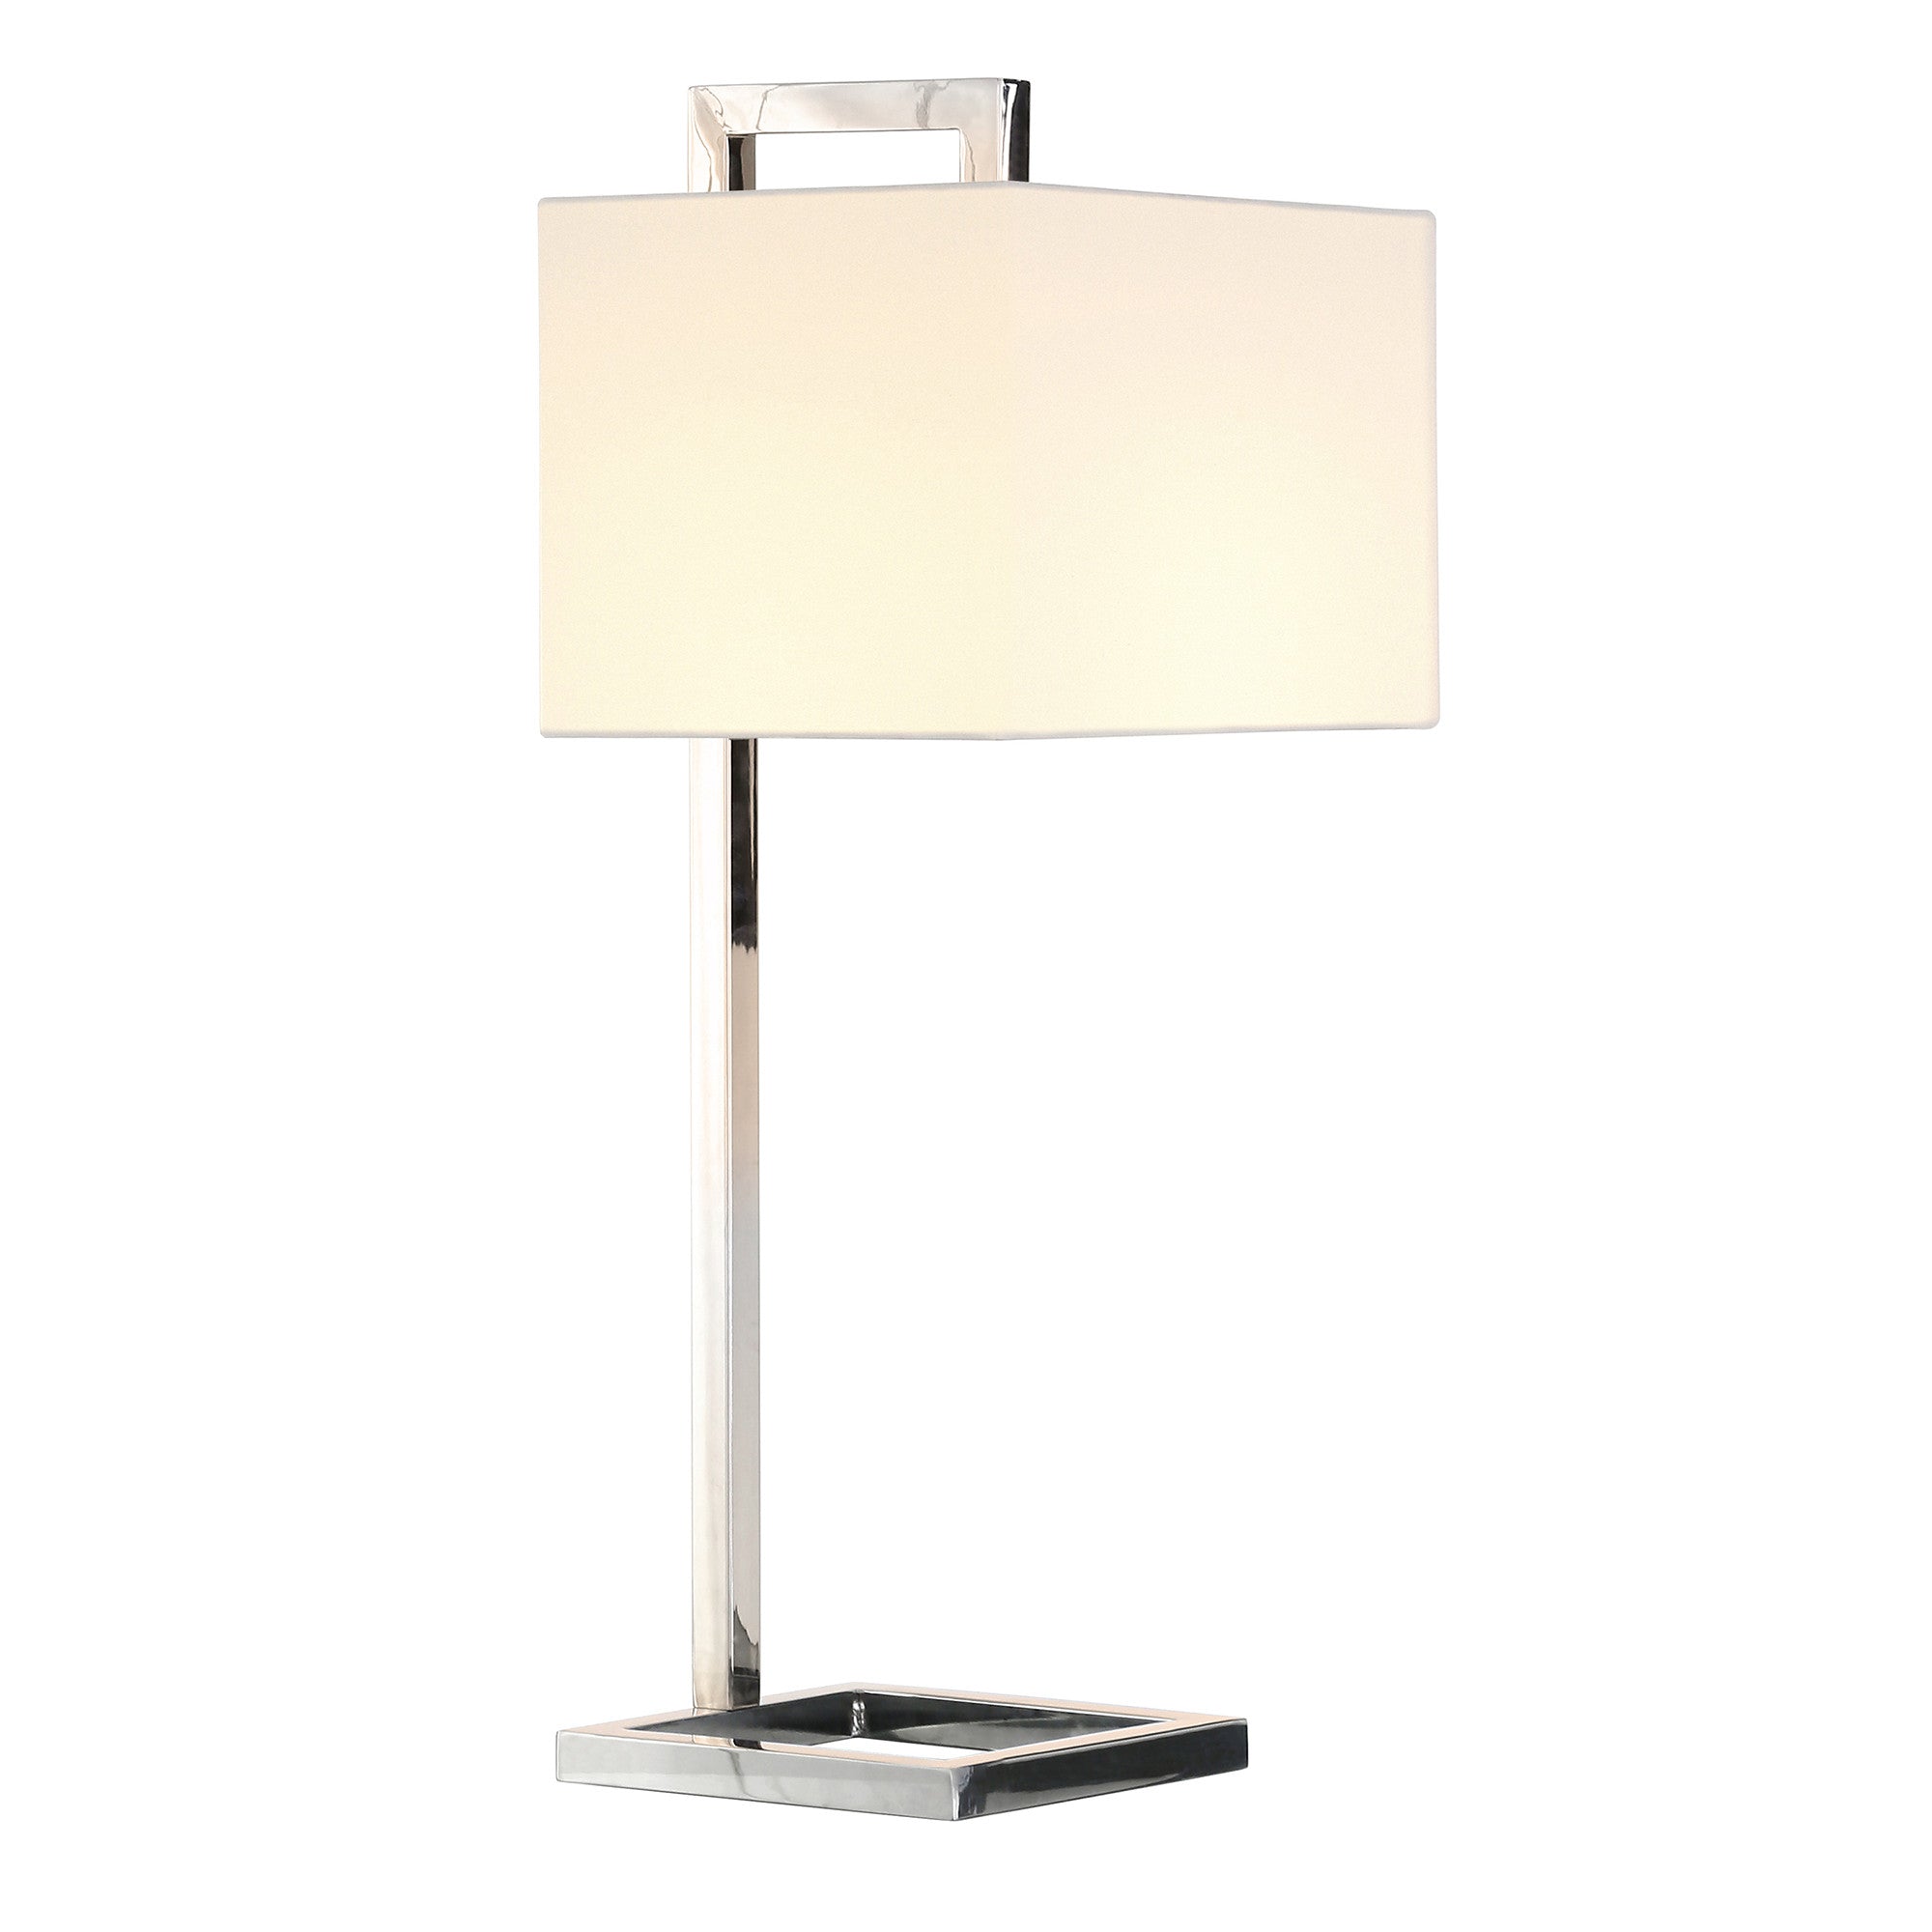 26" Silver Metal Square Arched Table Lamp With White Square Shade